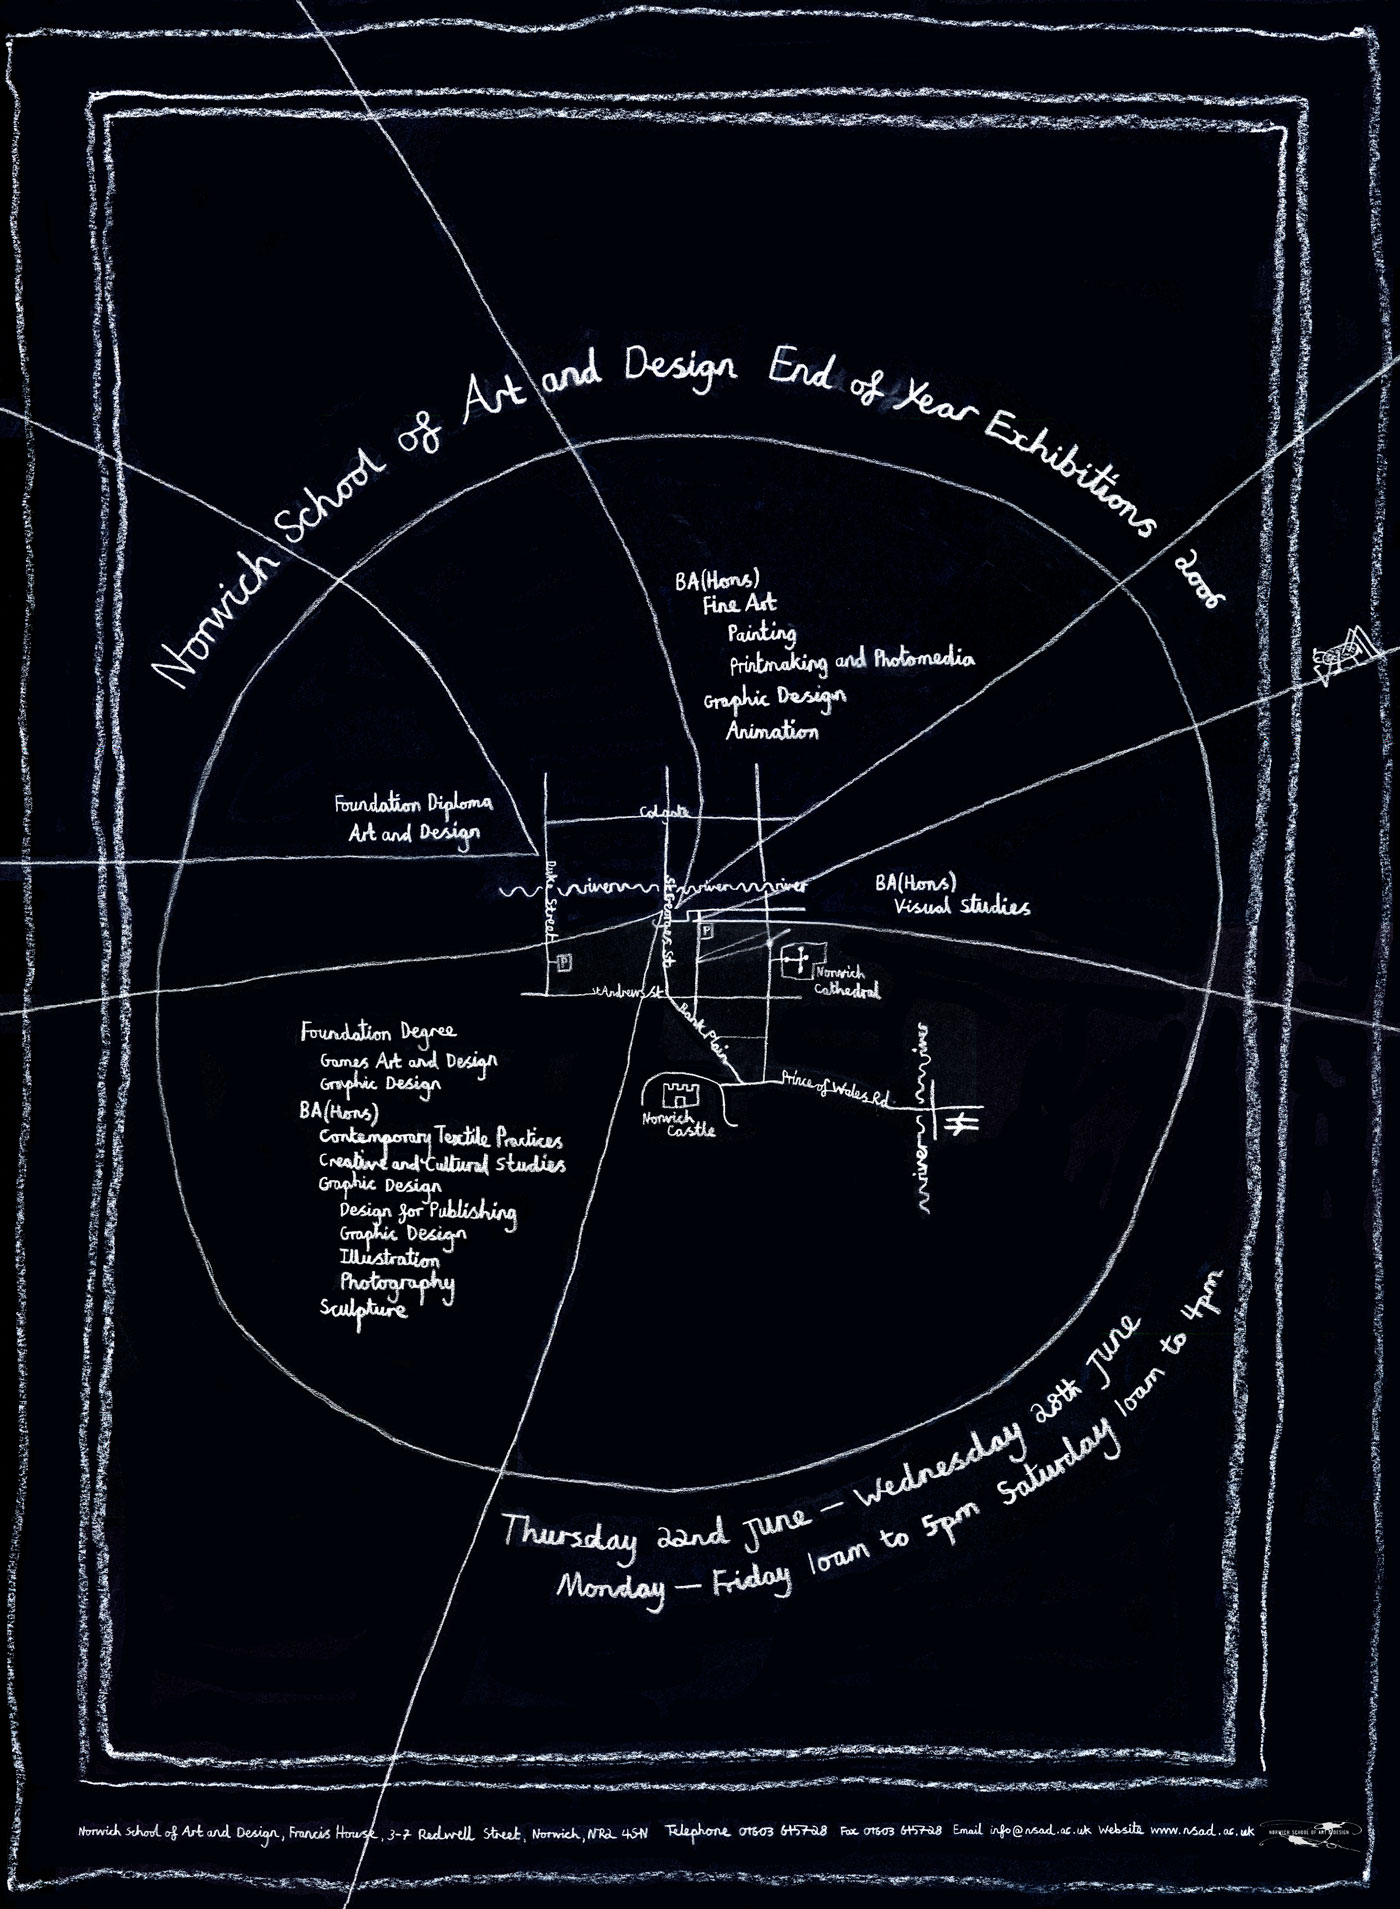 Norwich School of Art and Design end of year exhibitions poster design. Image showing illustrated poster hand drawn in chalk on black paper in a spiders web with a map of campus in the middle